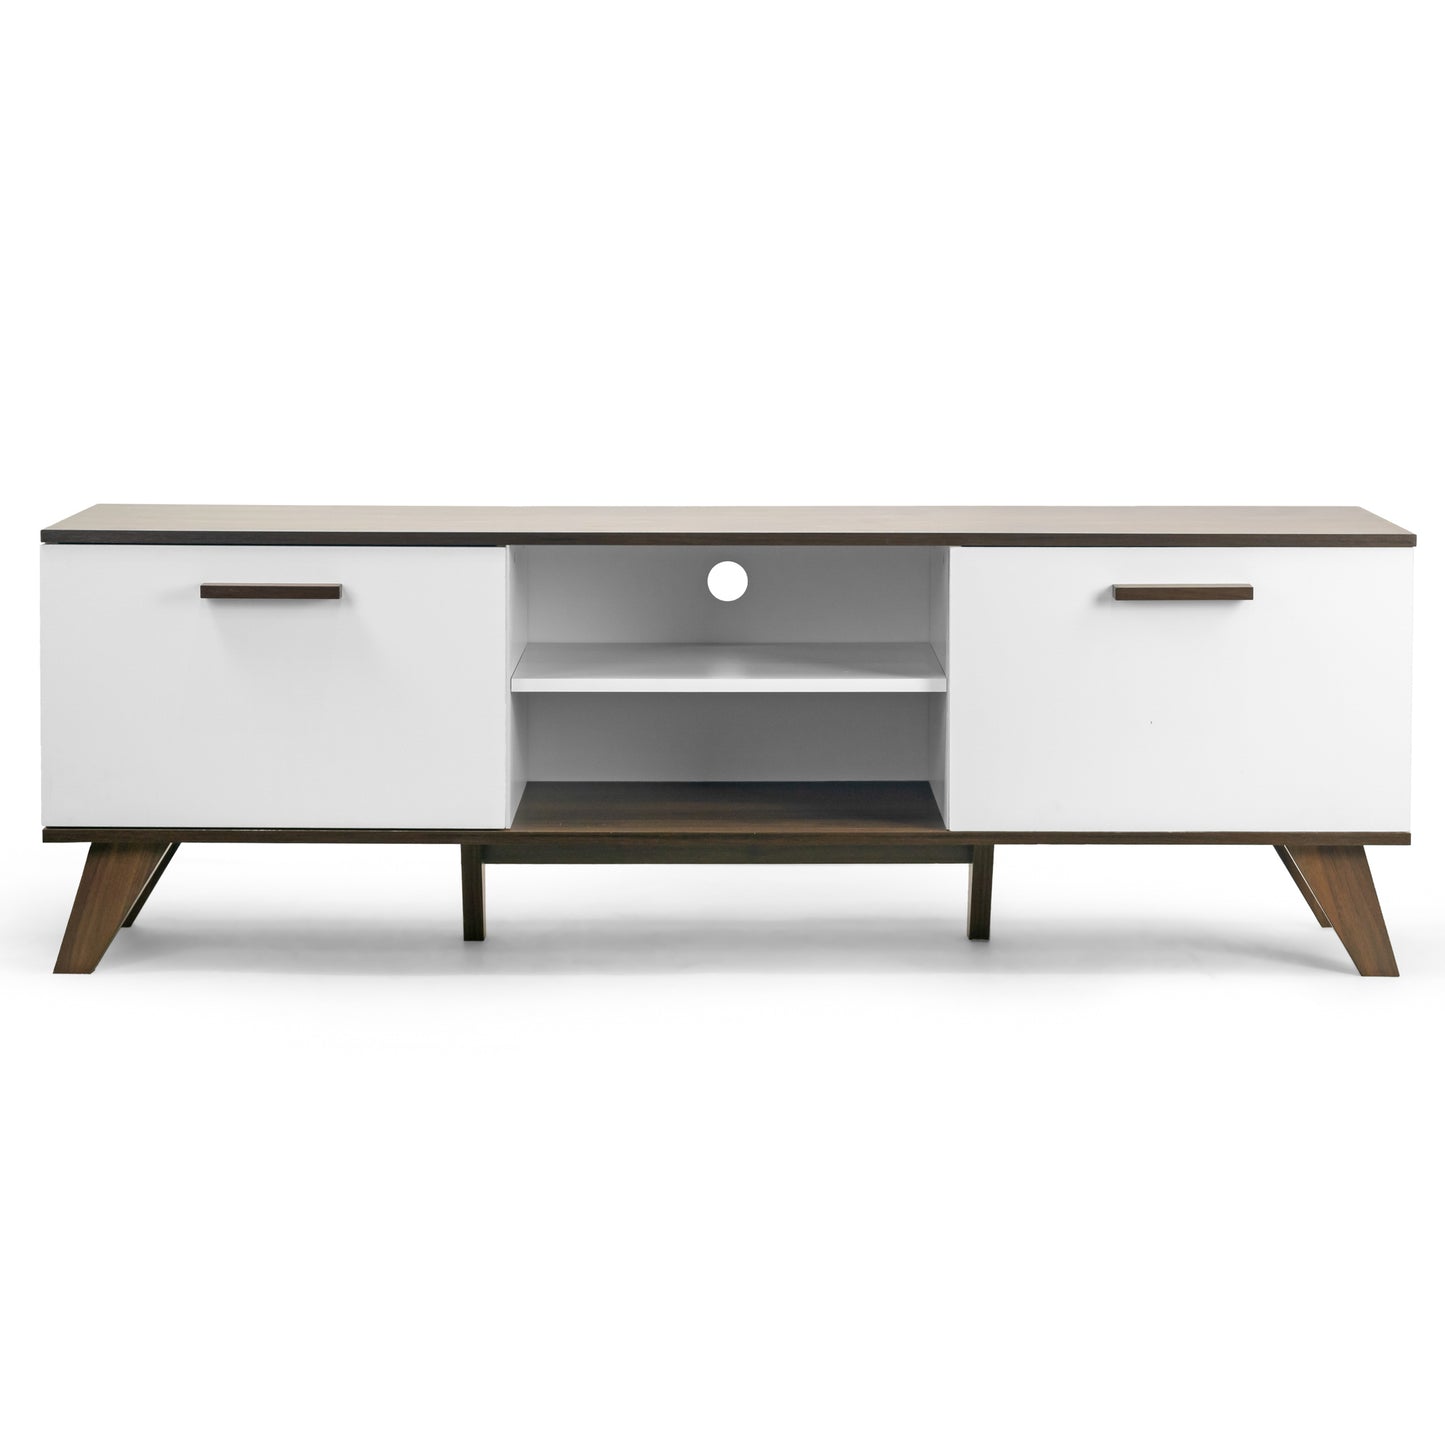 Annis TV Stand Walnut Finish with Contrasting White Door